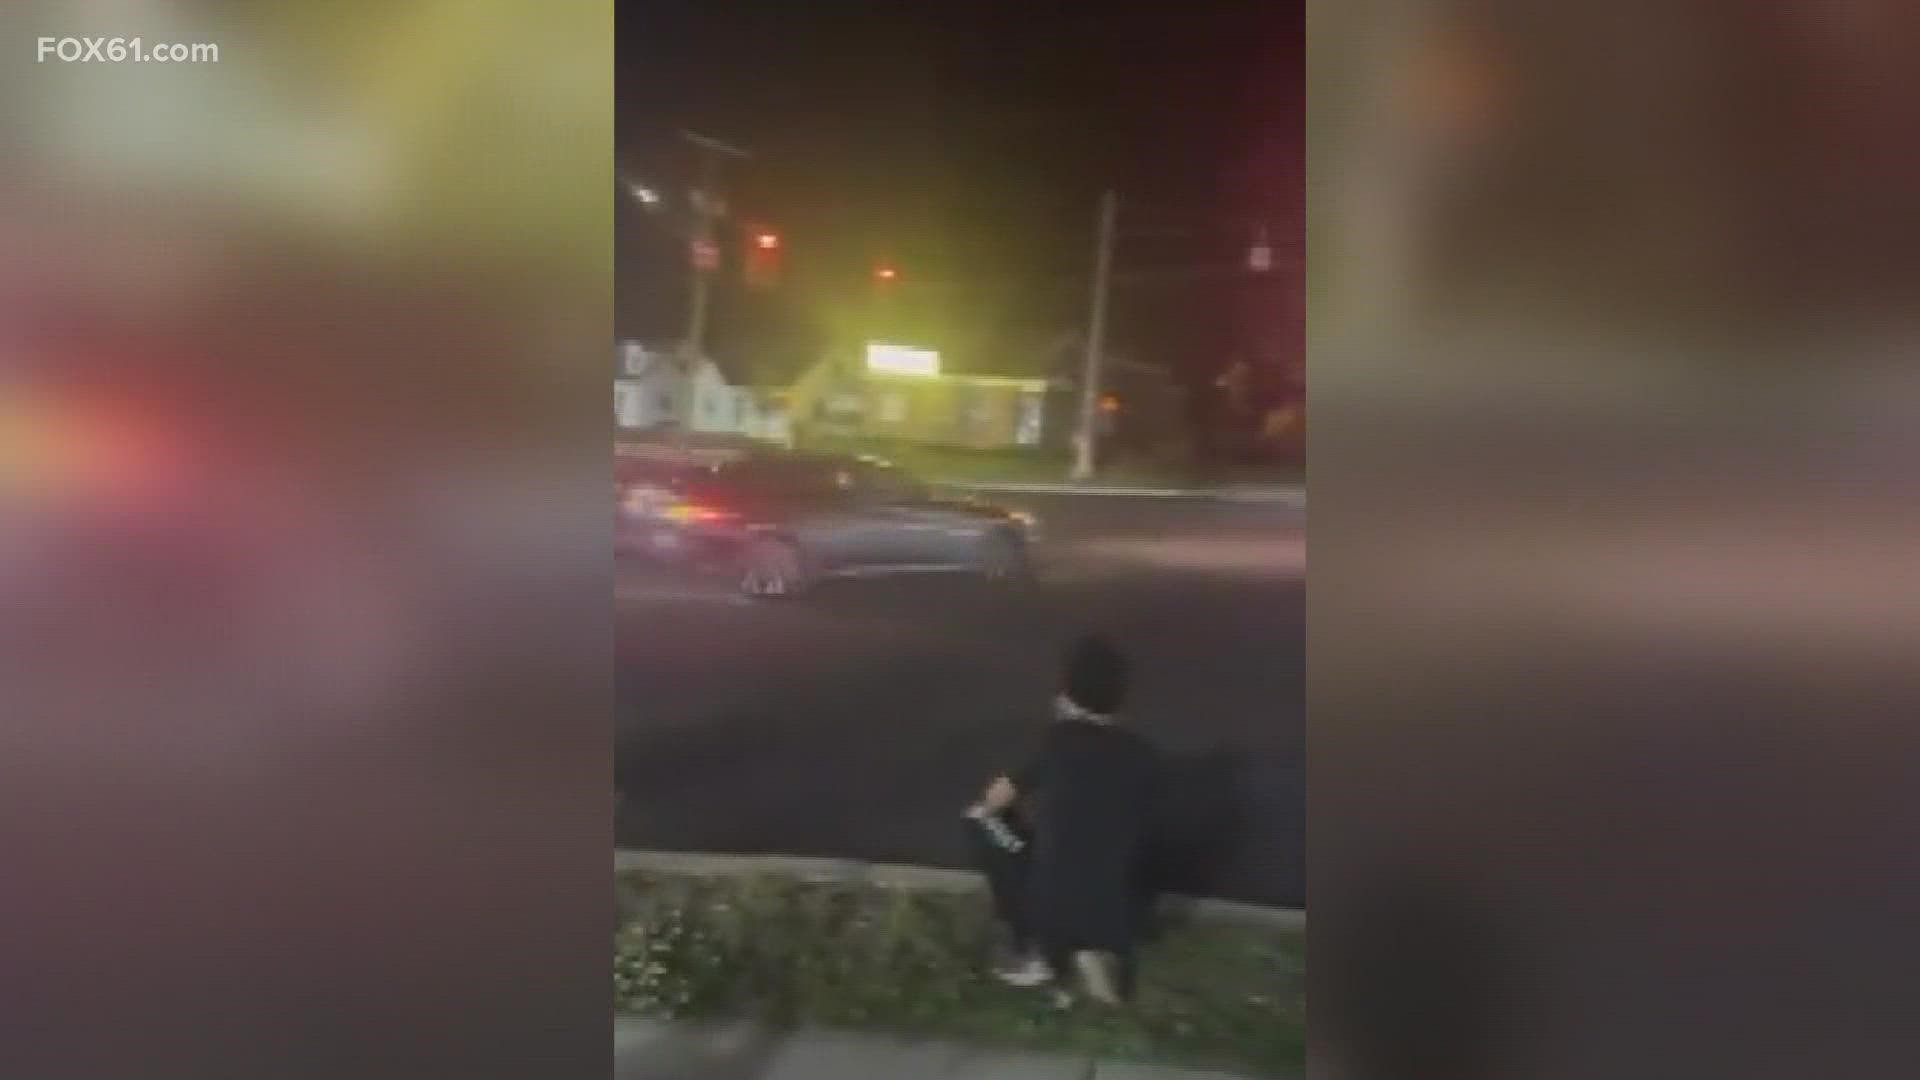 Illegal street racers performed dangerous stunts at busy intersection